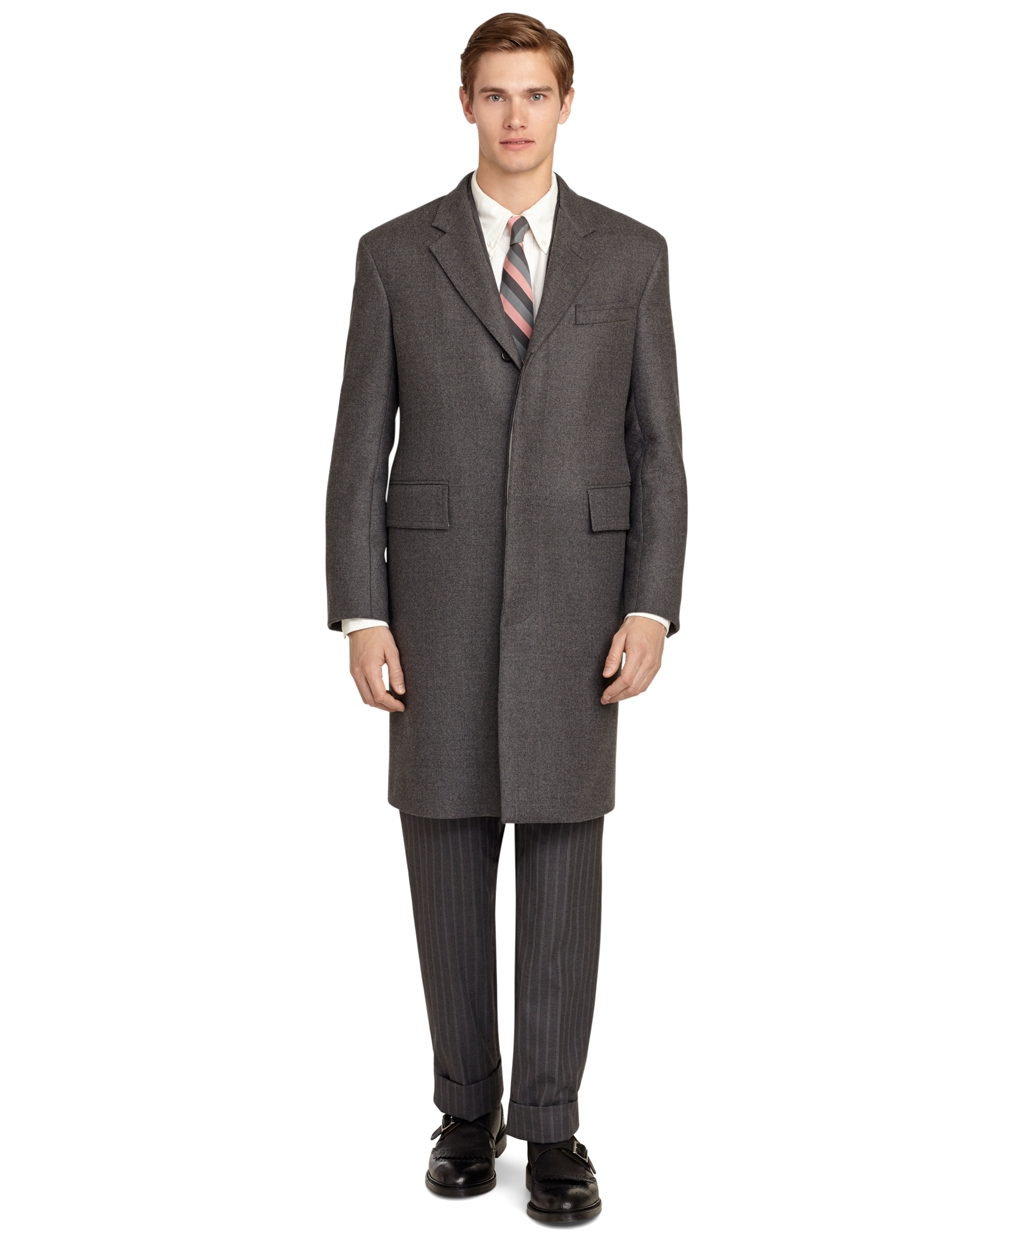 Lyst - Brooks Brothers Grey Chesterfield Coat in Gray for Men